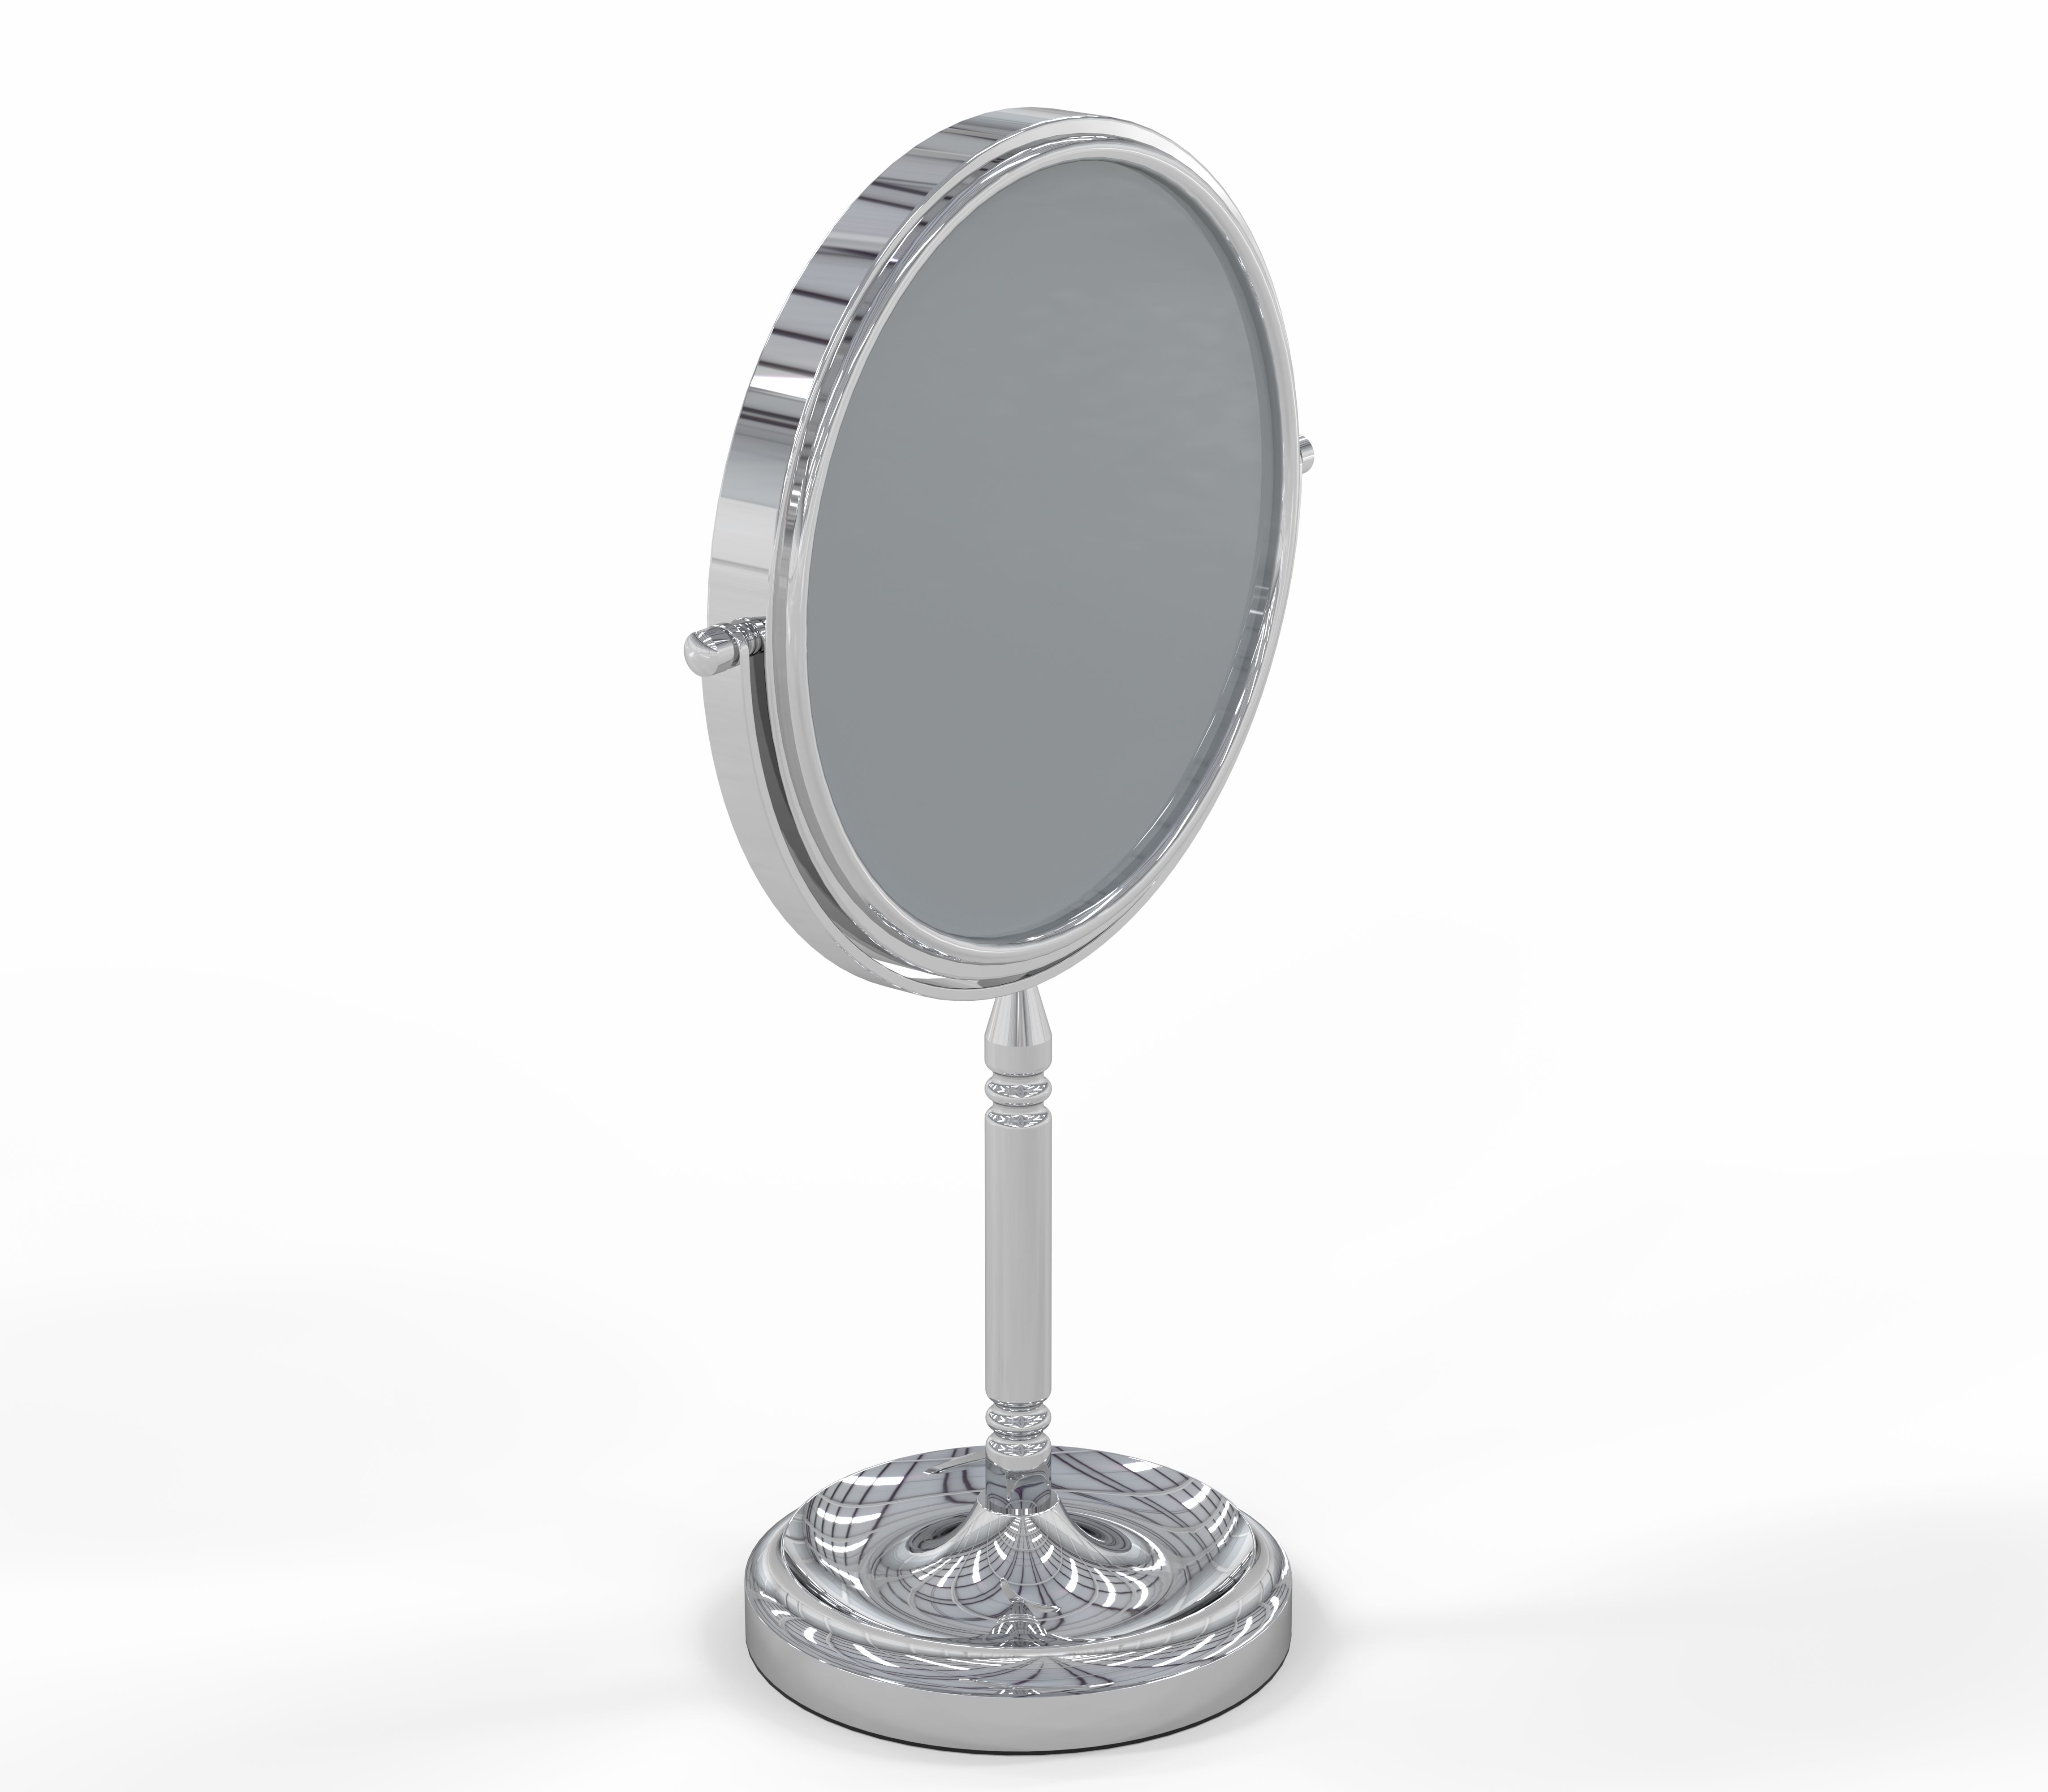 Aptations 86645 Recessed Base Vanity Mirror In Chrome 86645 - Chrome